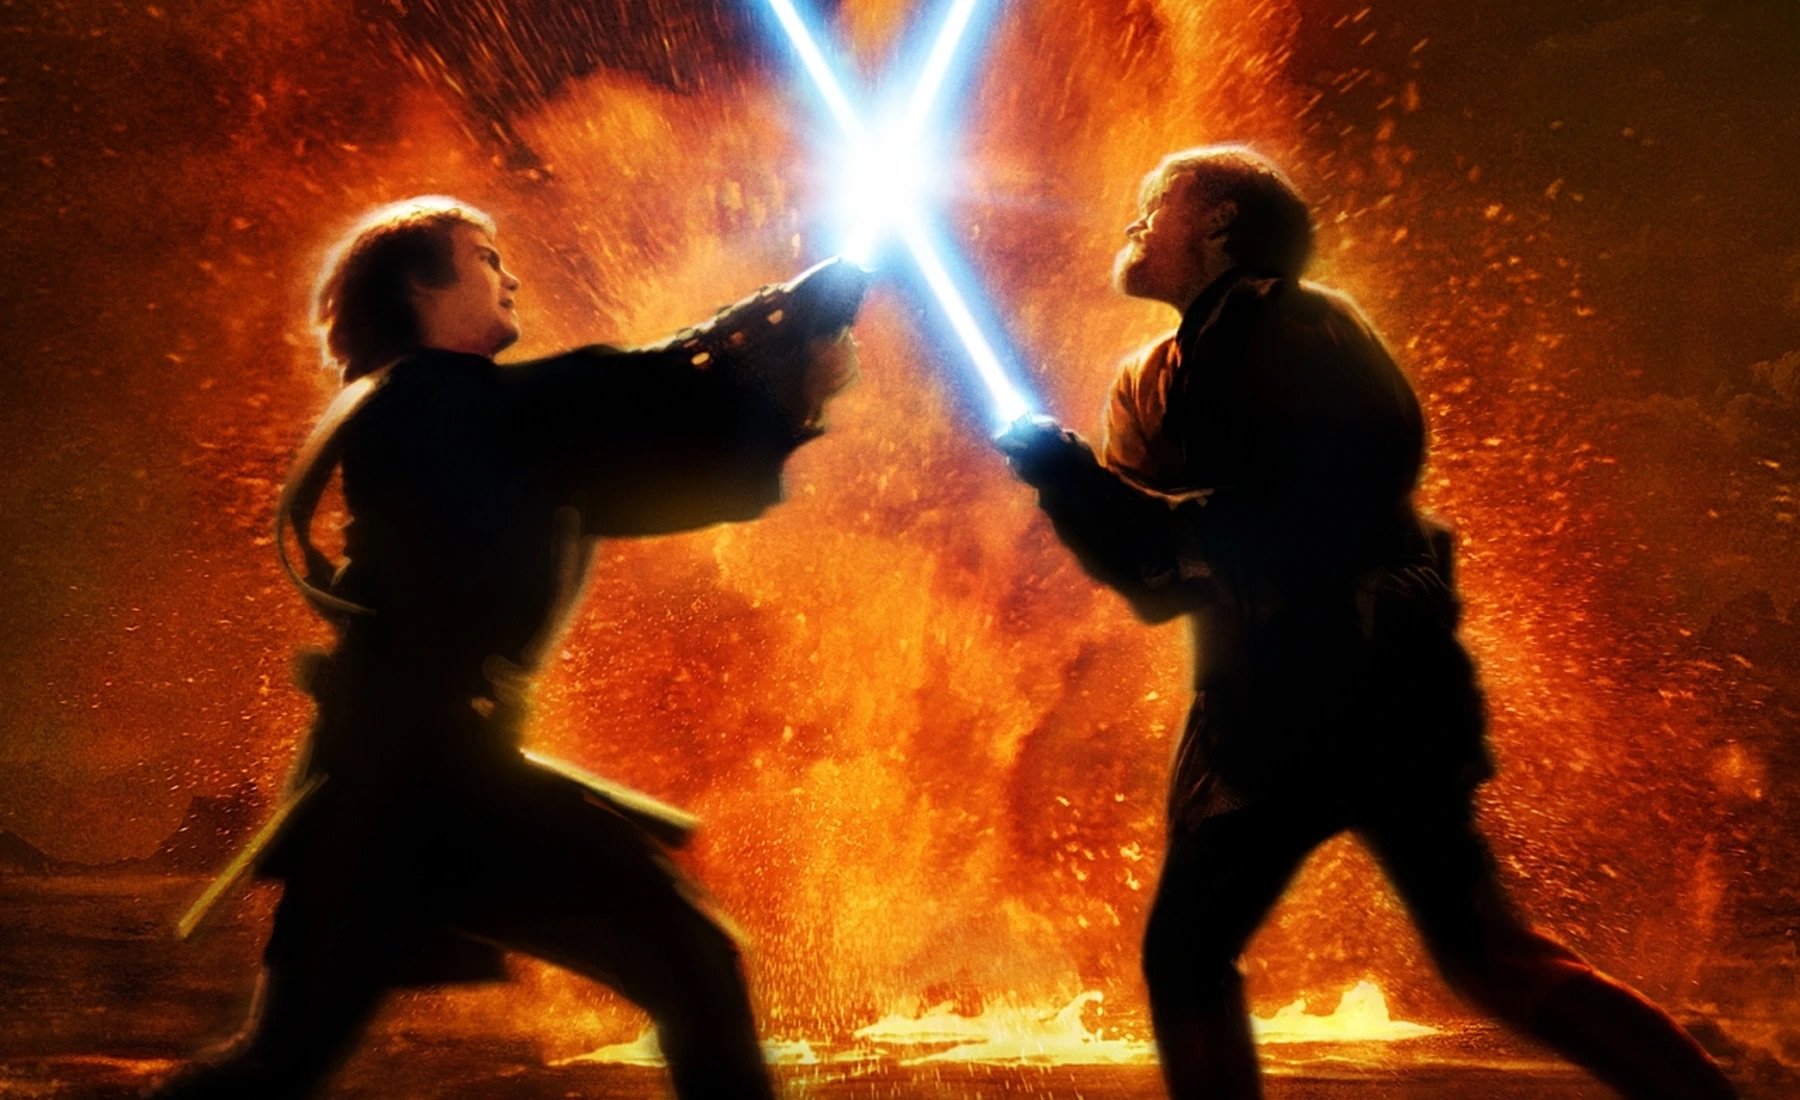 Anakin Skywalker and Obi-Wan Kenobi duel with lightsabers in Star Wars: Revenge of the Sith